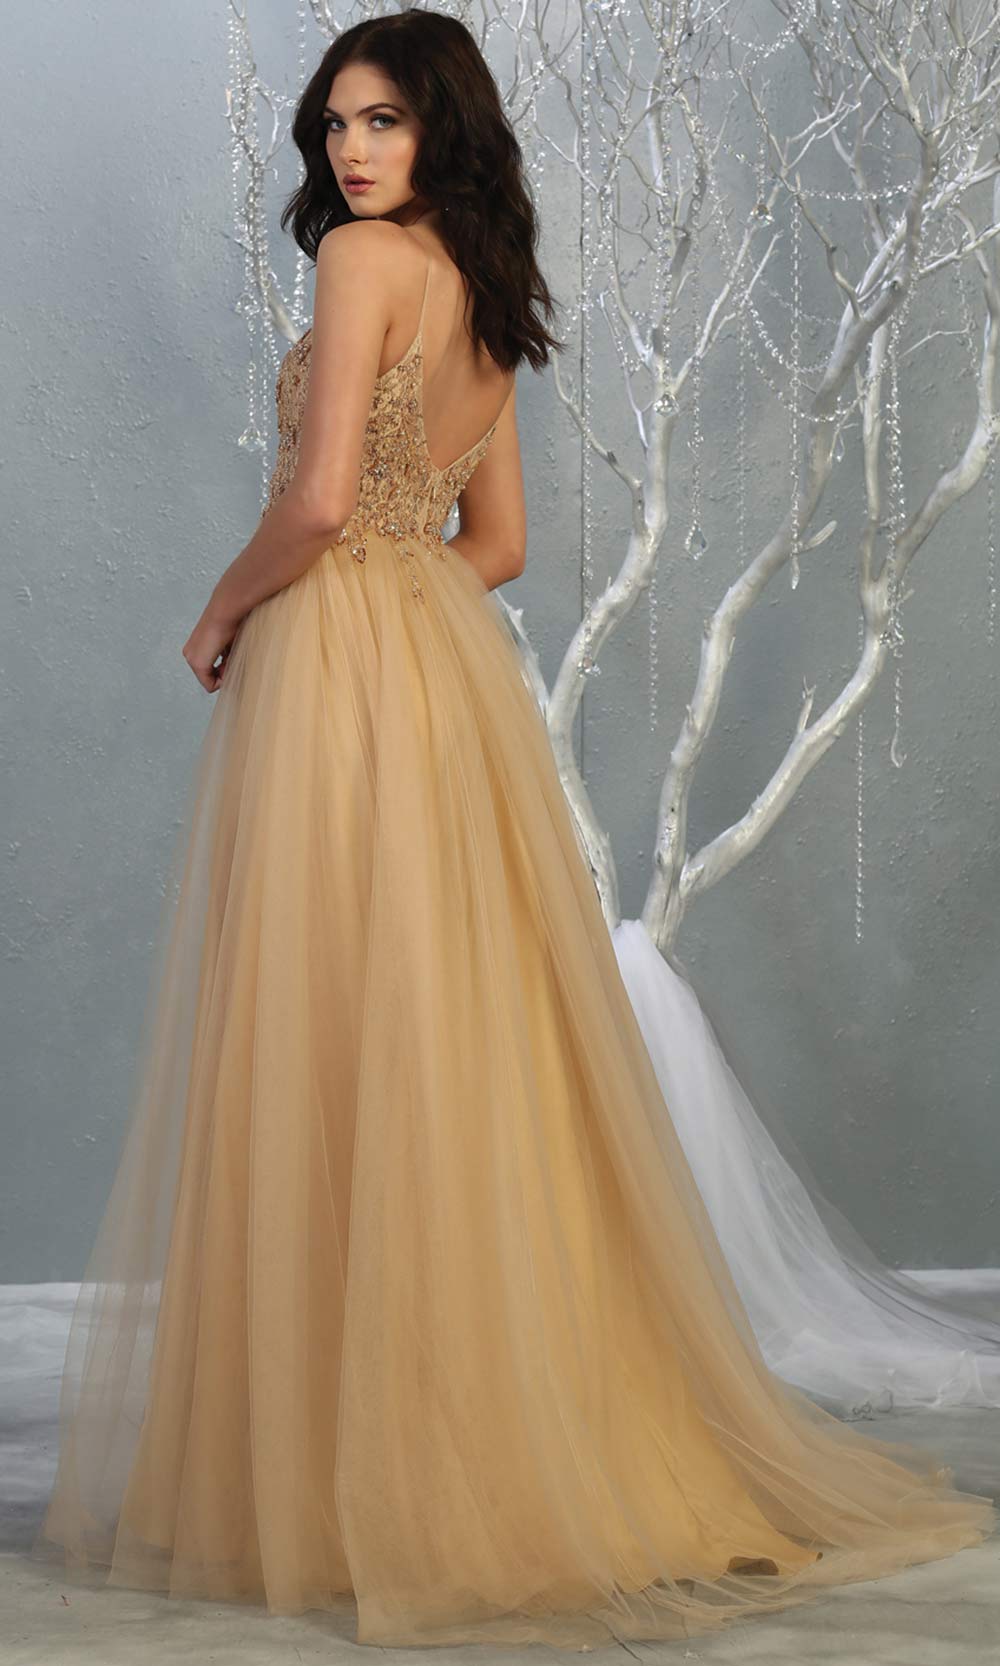 Mayqueen MQ1778 long champagne scoop neck flowy tulle skirt dress with high slit. Perfect for prom, engagement dress, e-shoot dress, formal wedding guest dress, debut, quinceanera, sweet 16, gala. Plus sizes avail in this light gold semi ballgown-b.jpg